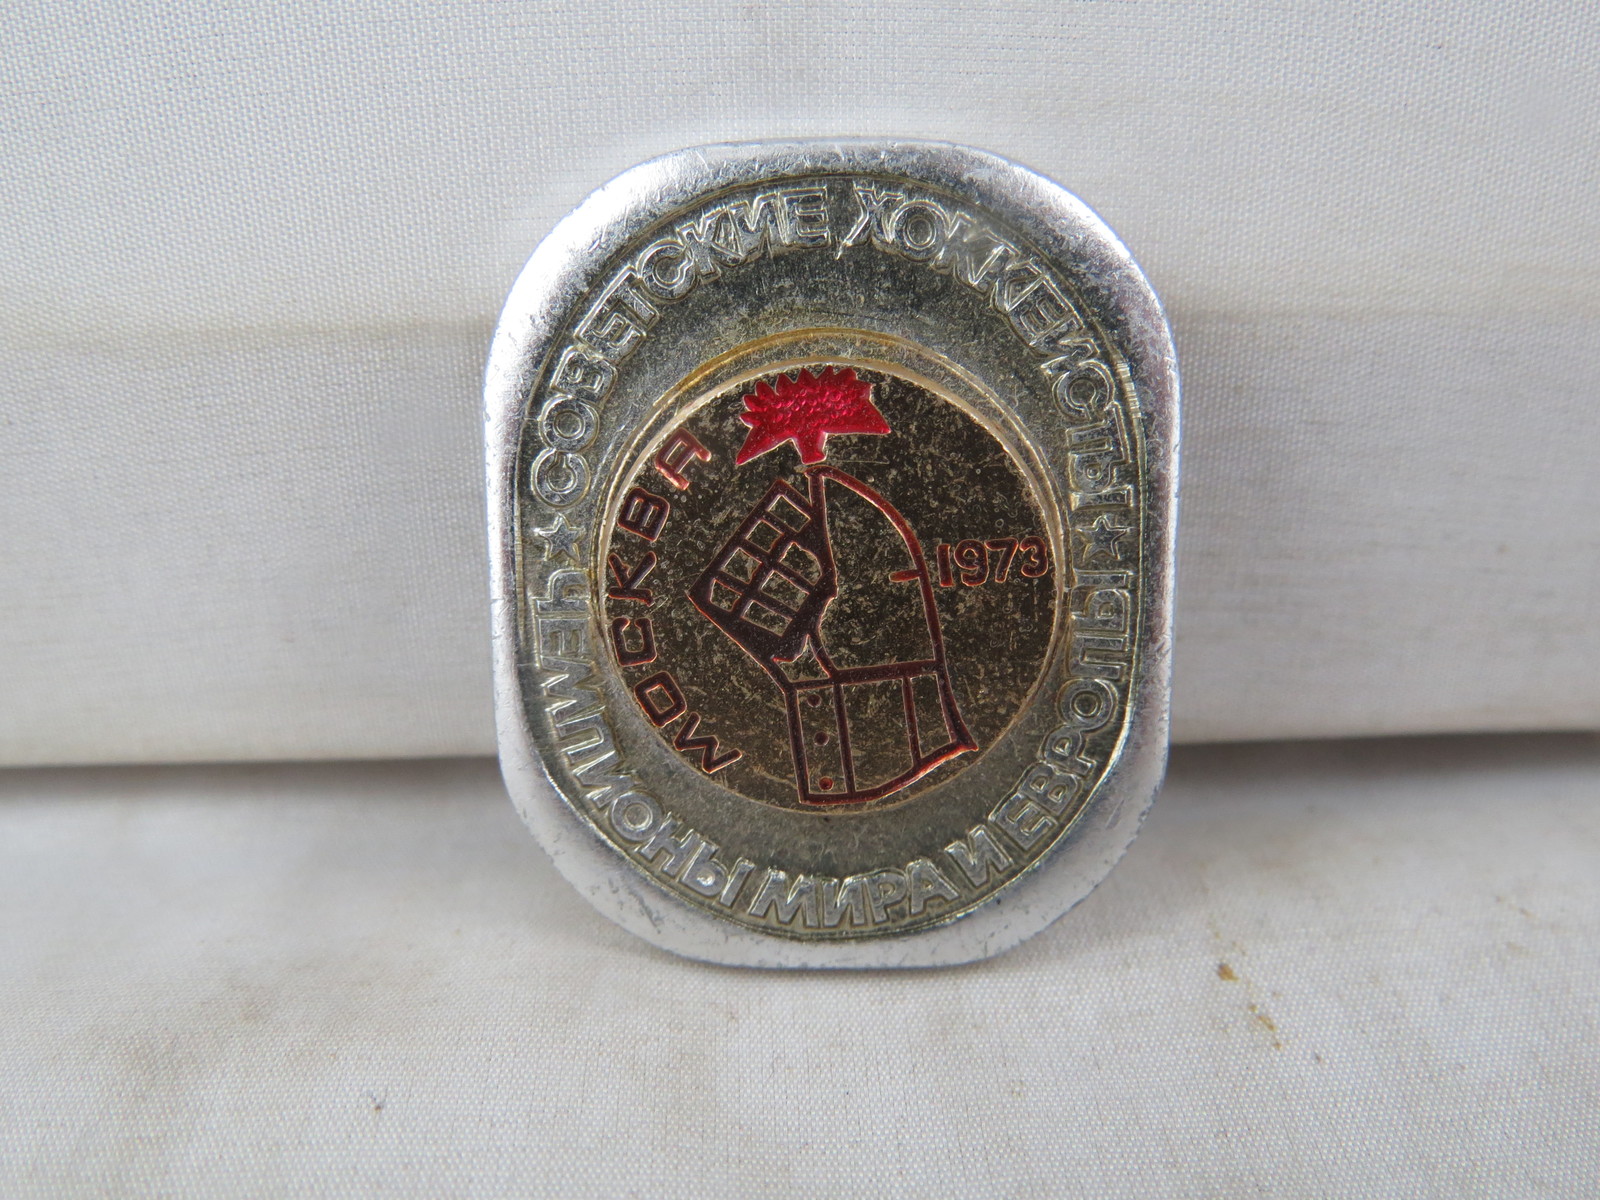 Primary image for Vintage Soviet Hockey Pin - 1973 World Champions - Stamped Pin